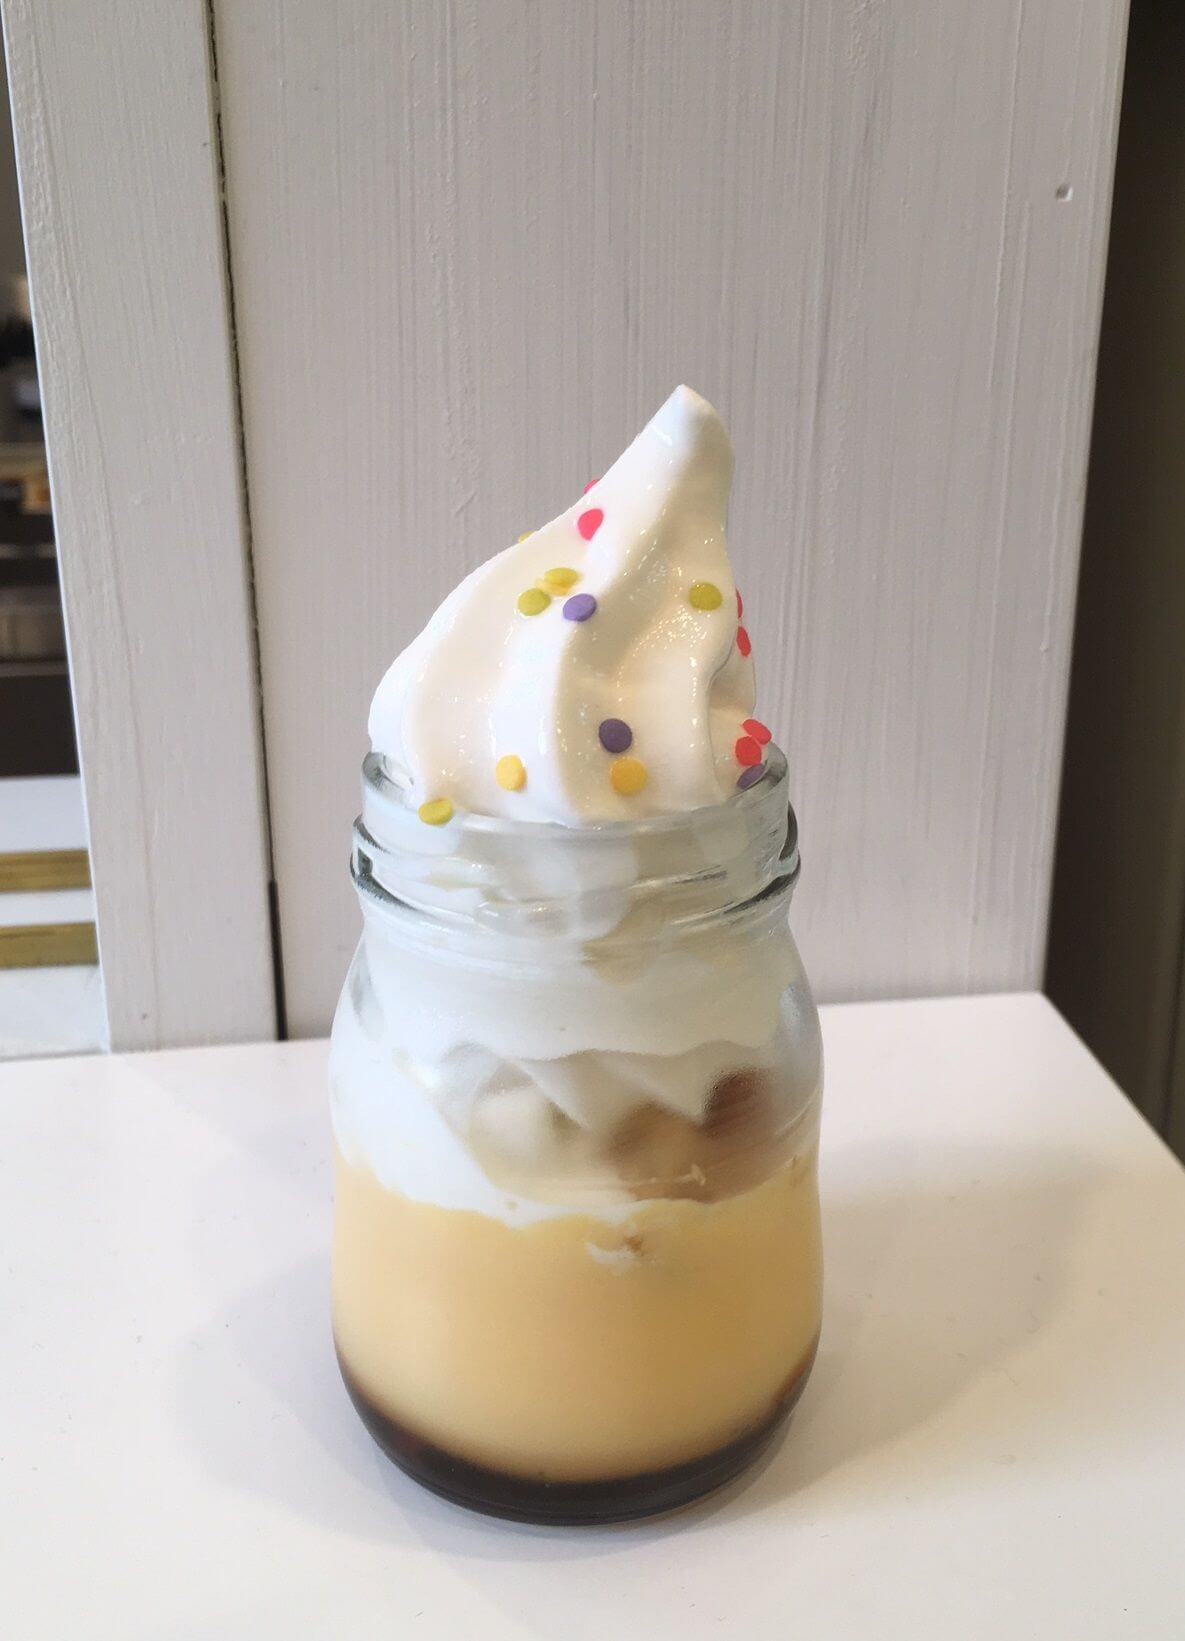 New ‘Purin Soft’ Dessert Released at Ise Purin no Tetsujin in Ise